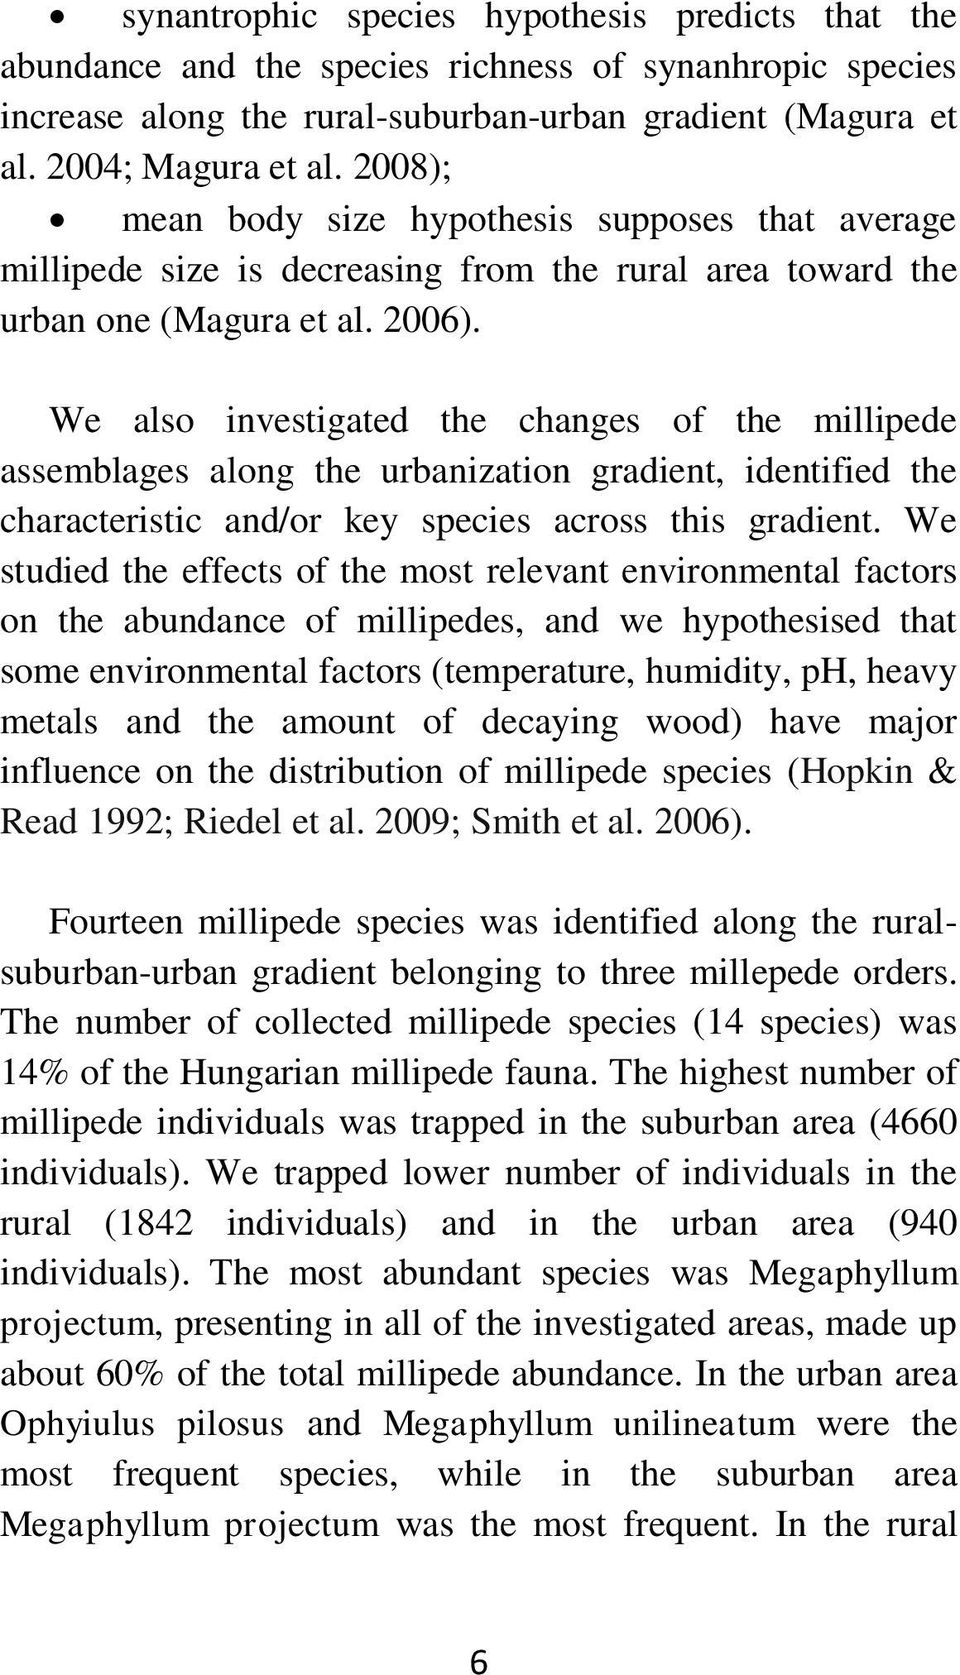 We also investigated the changes of the millipede assemblages along the urbanization gradient, identified the characteristic and/or key species across this gradient.